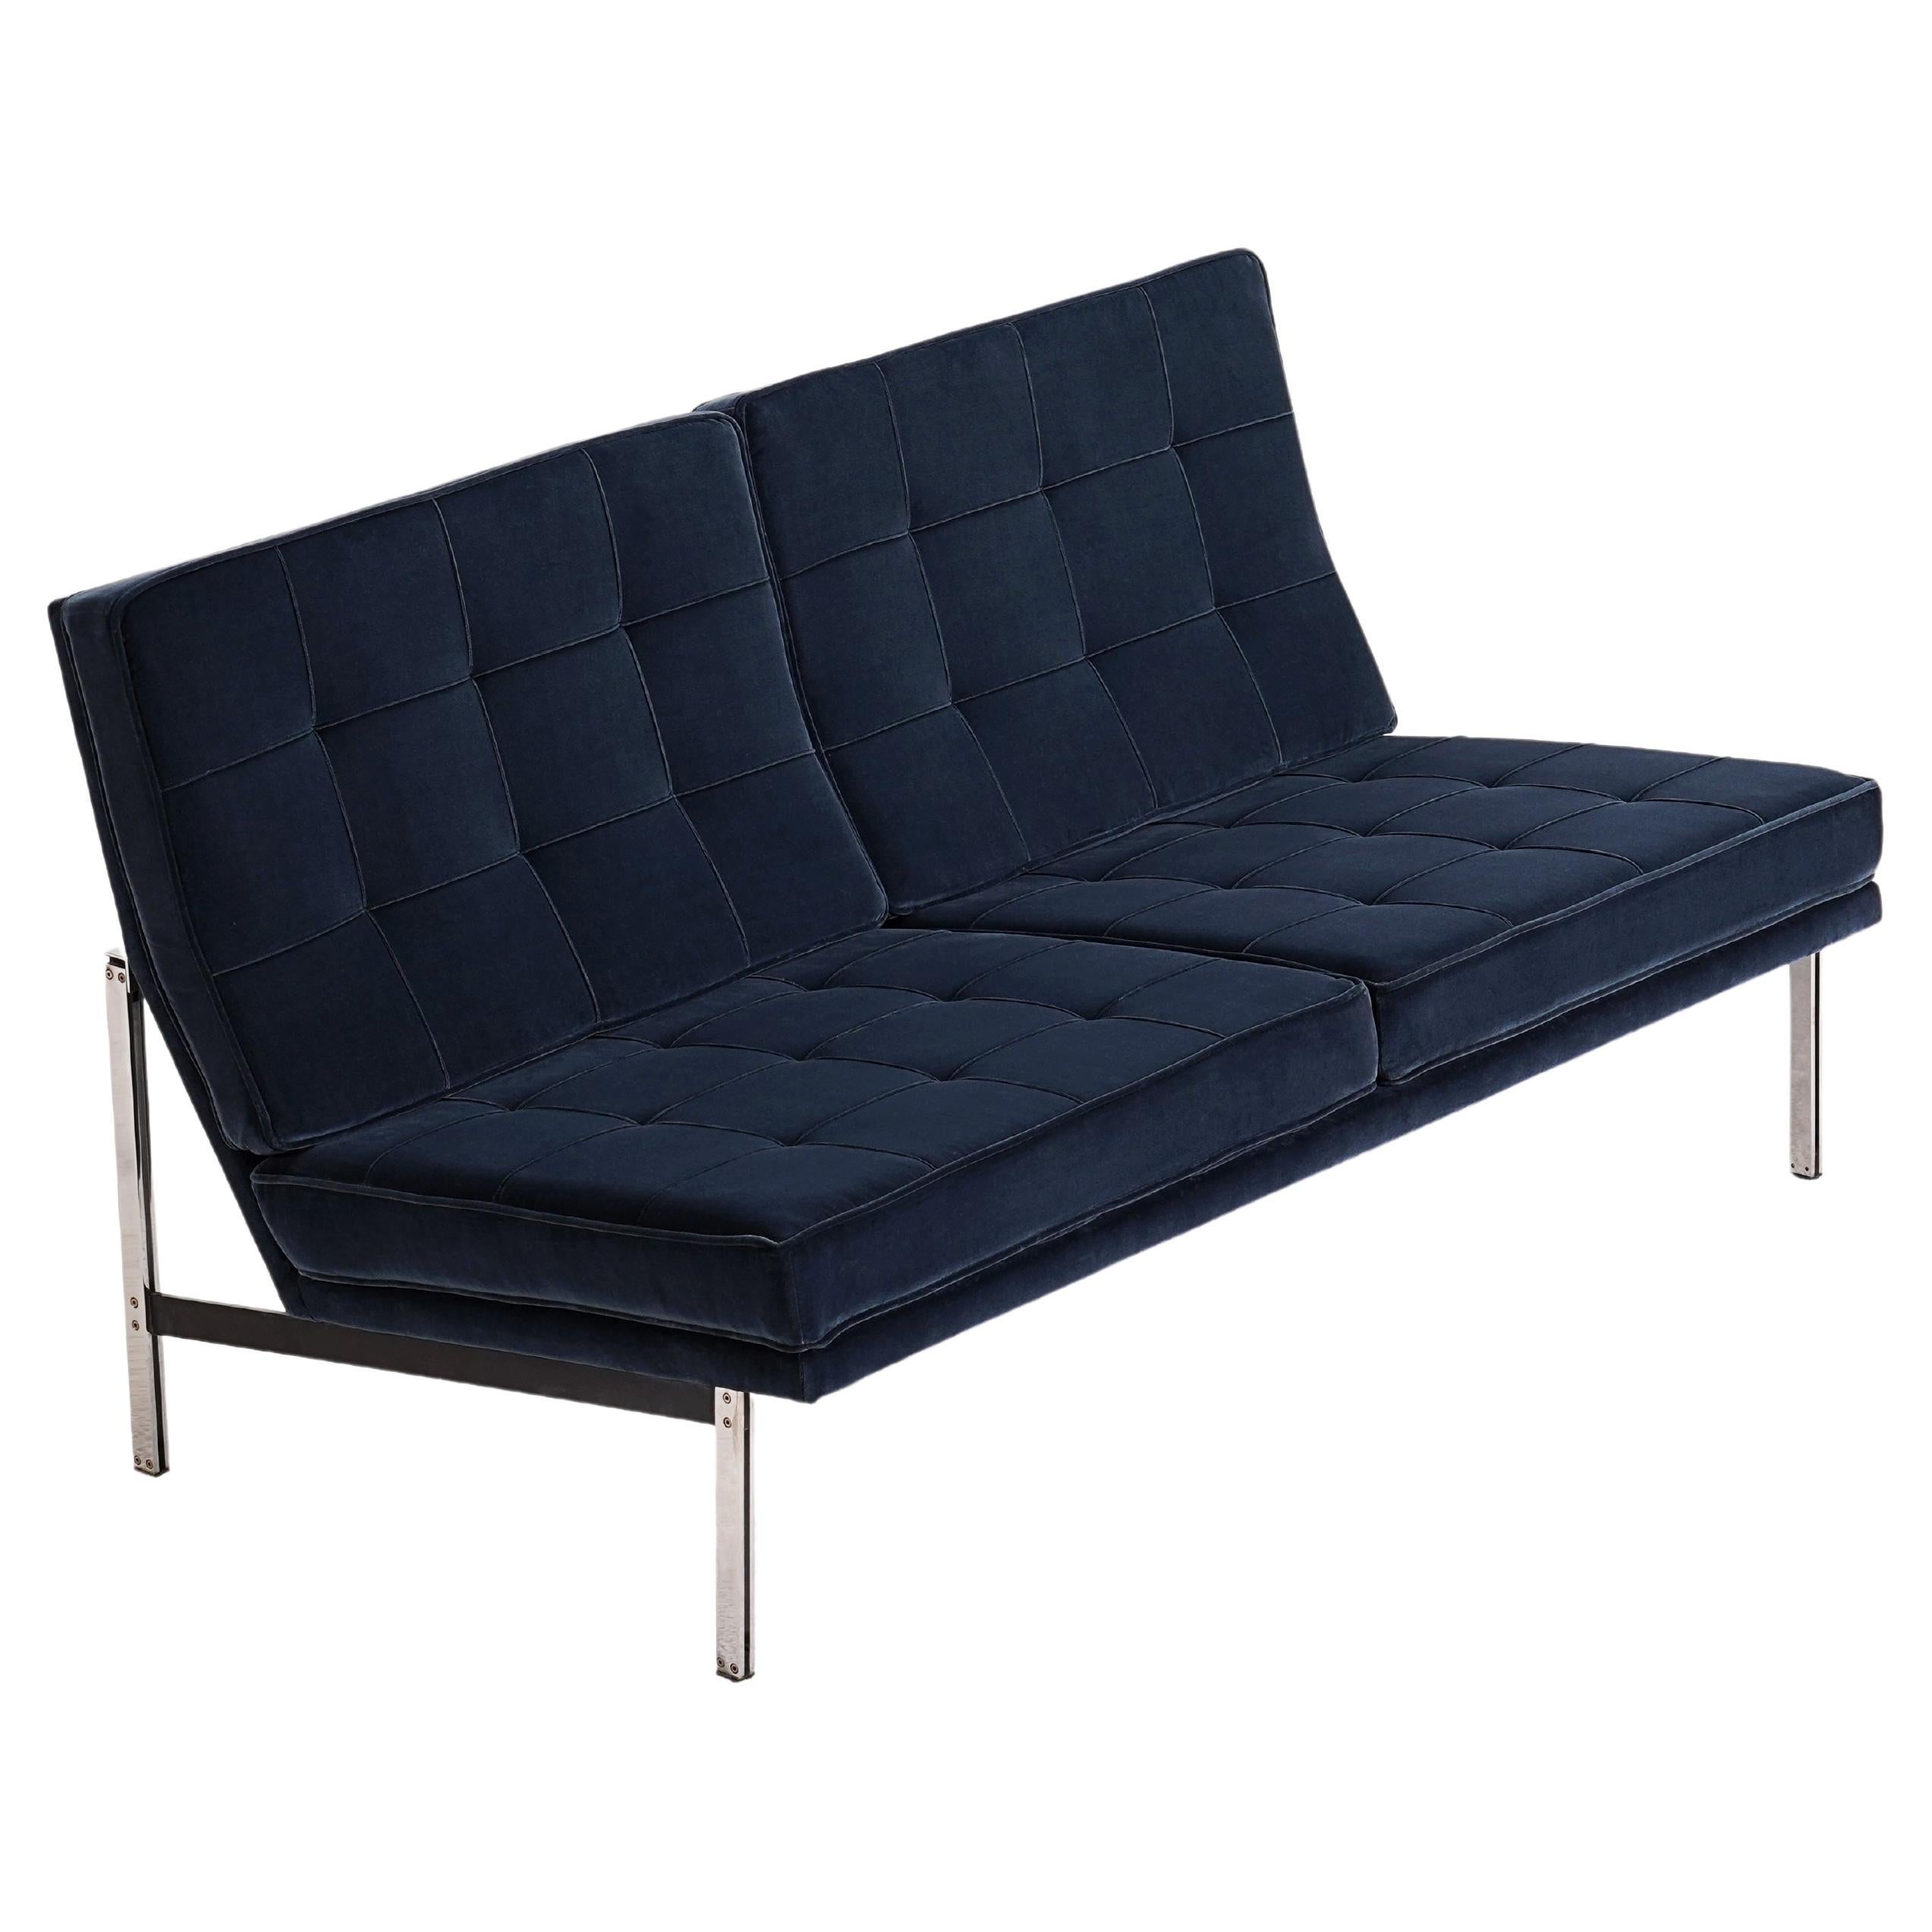 Florence Knoll, Sofa "Parallel Bar" for Knoll, 1954 / 1960. Newly upholstered. For Sale